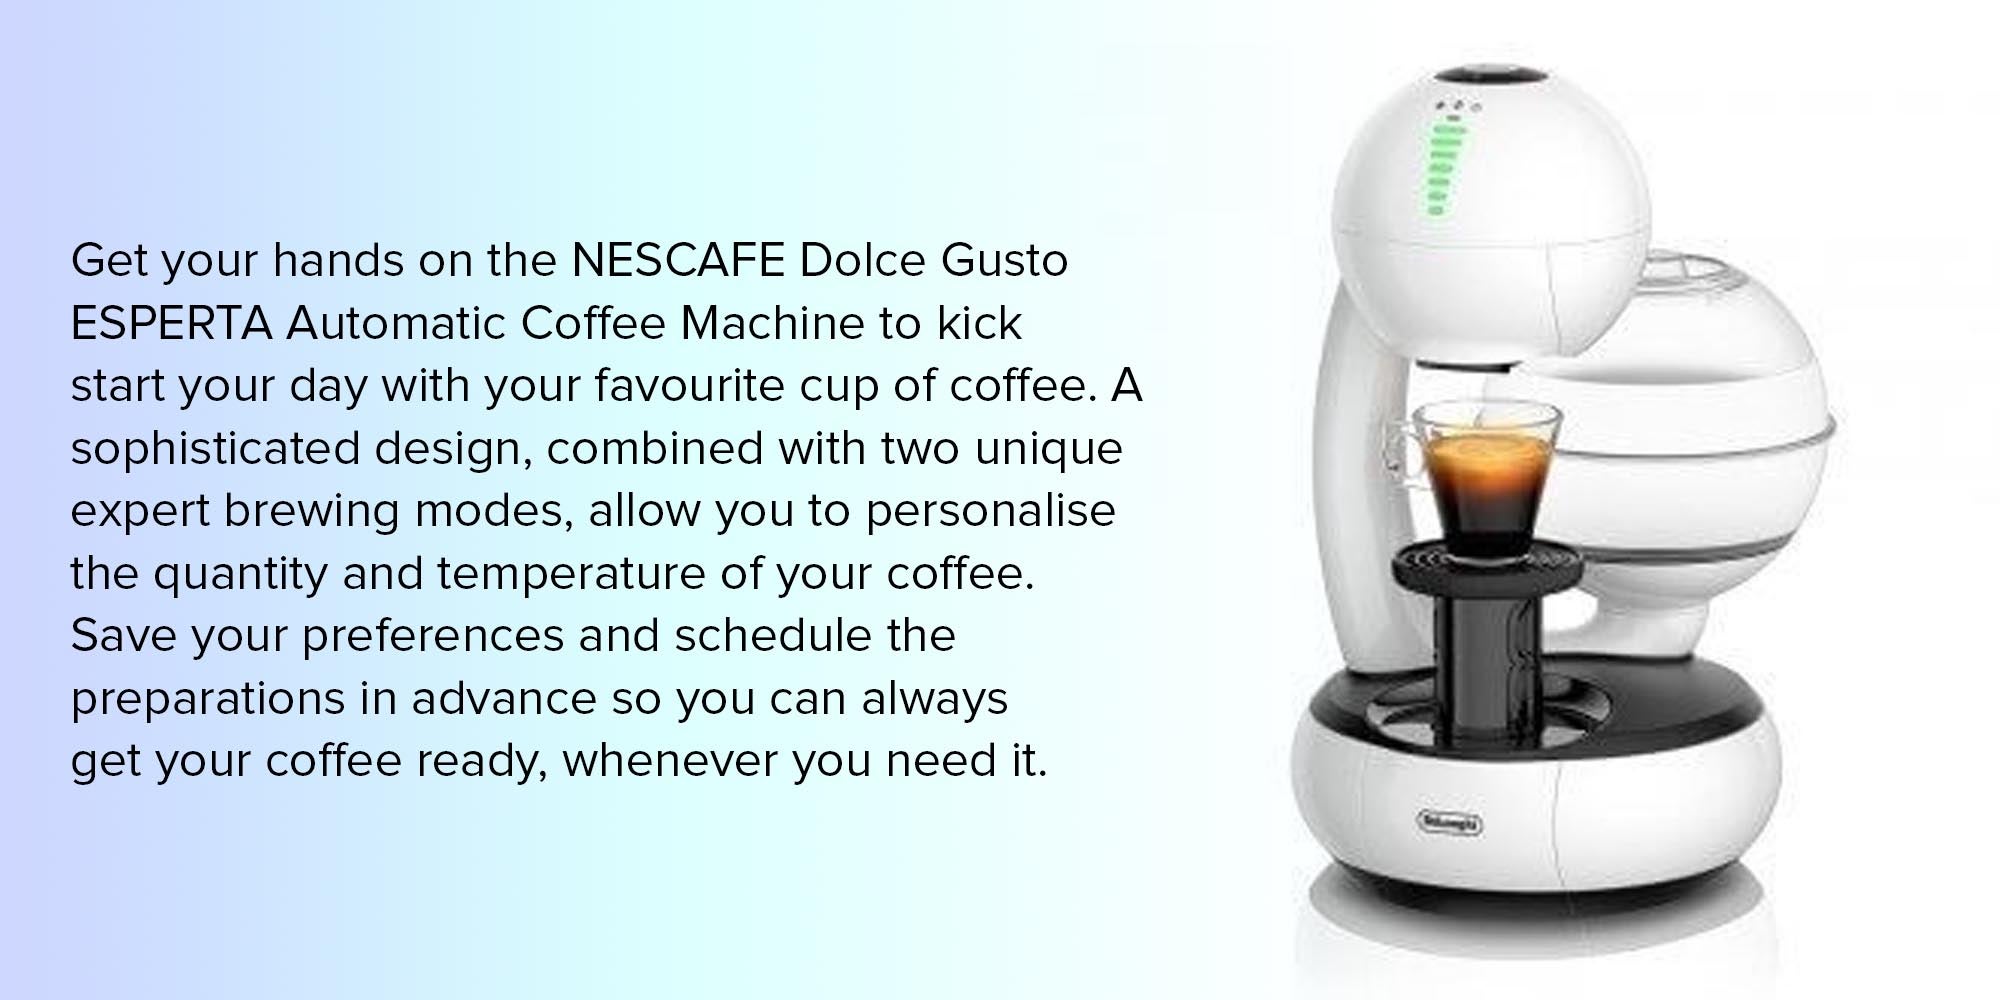 N30544631A 2 Nescafe &Lt;A Href=&Quot;Https://Lablaab.com/Wp-Content/Uploads/2020/12/File-1569226923.Pdf&Quot;&Gt;Esperta User Manual&Lt;/A&Gt; Esperta Features A 1.4L Extra-Large Water Tank And Measures 214 (W) X 364 (H) X 266 (D) &Lt;Table Border=&Quot;0&Quot; Width=&Quot;100%&Quot; Cellspacing=&Quot;0&Quot; Cellpadding=&Quot;0&Quot;&Gt; &Lt;Tbody&Gt; &Lt;Tr&Gt; &Lt;Td Valign=&Quot;Top&Quot; Width=&Quot;96&Quot;&Gt;&Lt;Img Src=&Quot;Https://Www.dolcegusto-Me.com/Ae/Media/Wysiwyg/Esperta-Pictos/Aa_Picto_Expresso_Boost.jpg&Quot; Width=&Quot;96&Quot; Border=&Quot;0&Quot; /&Gt;&Lt;/Td&Gt; &Lt;Td Class=&Quot;Inner Contents&Quot; Align=&Quot;Left&Quot; Valign=&Quot;Top&Quot;&Gt;With The Espresso Boost Expert Preparation Mode, You Can Enjoy More Intense Espressos Just At A Touch Of A Button.&Lt;/Td&Gt; &Lt;/Tr&Gt; &Lt;Tr&Gt; &Lt;Td Valign=&Quot;Top&Quot; Width=&Quot;96&Quot;&Gt;&Lt;Img Src=&Quot;Https://Www.dolcegusto-Me.com/Ae/Media/Wysiwyg/Esperta-Pictos/Aa_Picto_Delicate_Brew.jpg&Quot; Width=&Quot;96&Quot; Border=&Quot;0&Quot; /&Gt;&Lt;/Td&Gt; &Lt;Td Class=&Quot;Inner Contents&Quot; Align=&Quot;Left&Quot; Valign=&Quot;Top&Quot;&Gt;With The Delicate Brew Expert Preparation Mode, You Can Taste More Balanced And Aromatic Grandes Or Lungos Just At The Touch Of A Button.&Lt;/Td&Gt; &Lt;/Tr&Gt; &Lt;Tr&Gt; &Lt;Td Valign=&Quot;Top&Quot; Width=&Quot;96&Quot;&Gt;&Lt;Img Src=&Quot;Https://Www.dolcegusto-Me.com/Ae/Media/Wysiwyg/Esperta-Pictos/Picto_Bluetooth.jpg&Quot; Width=&Quot;96&Quot; Border=&Quot;0&Quot; /&Gt;&Lt;/Td&Gt; &Lt;Td Class=&Quot;Inner Contents&Quot; Align=&Quot;Left&Quot; Valign=&Quot;Top&Quot;&Gt;Fully Customize Your Coffee With The Nescafé&Lt;Sup&Gt;®&Lt;/Sup&Gt; Dolce Gusto&Lt;Sup&Gt;®&Lt;/Sup&Gt; App Connected Via Bluetooth To Your Machine. Select Temperature And Size Of Your Coffee, Memorize Your Preferences And Schedule Beverage Preparation In Advance. You Can Wake Up In The Morning With The Aroma Of Your Favourite Coffee Already Prepared For You!&Lt;/Td&Gt; &Lt;/Tr&Gt; &Lt;Tr&Gt; &Lt;Td Valign=&Quot;Top&Quot; Width=&Quot;96&Quot;&Gt;&Lt;Img Src=&Quot;Https://Www.dolcegusto-Me.com/Ae/Media/Wysiwyg/Esperta-Pictos/Technology_Bars_Esperta_1000X1000.Jpg&Quot; Width=&Quot;96&Quot; Border=&Quot;0&Quot; /&Gt;&Lt;/Td&Gt; &Lt;Td Class=&Quot;Inner Contents&Quot; Align=&Quot;Left&Quot; Valign=&Quot;Top&Quot;&Gt;Slide In A Capsule And Create The Perfect Coffee With A Simple Touch Of A Button. With Esperta Coffee Machine You Can Create Everything From The Smallest 30Ml Ristretto To Our Largest Xl Coffee.&Lt;/Td&Gt; &Lt;/Tr&Gt; &Lt;Tr&Gt; &Lt;Td Valign=&Quot;Top&Quot; Width=&Quot;96&Quot;&Gt;&Lt;Img Src=&Quot;Https://Www.dolcegusto-Me.com/Ae/Media/Wysiwyg/Esperta-Pictos/Technology_Joystick_Esperta_1000X1000.Jpg&Quot; Width=&Quot;96&Quot; Border=&Quot;0&Quot; /&Gt;&Lt;/Td&Gt; &Lt;Td Class=&Quot;Inner Contents&Quot; Align=&Quot;Left&Quot; Valign=&Quot;Top&Quot;&Gt;Easily Activate The Espresso Boost And Delicate Brew Unique Extraction Modes From The Machine Directly&Lt;/Td&Gt; &Lt;/Tr&Gt; &Lt;Tr&Gt; &Lt;Td Valign=&Quot;Top&Quot; Width=&Quot;96&Quot;&Gt;&Lt;Img Src=&Quot;Https://Www.dolcegusto-Me.com/Ae/Media/Wysiwyg/Machines/15-Bars-Pressure-Icon-3-En.jpg&Quot; Width=&Quot;96&Quot; Border=&Quot;0&Quot; /&Gt;&Lt;/Td&Gt; &Lt;Td Class=&Quot;Inner Contents&Quot; Align=&Quot;Left&Quot; Valign=&Quot;Top&Quot;&Gt;With Esperta’s, Up To 15 Bar High Pressure System, You Will Enjoy A Professional Coffee With A Thick, Velvety &Lt;Em&Gt;Crema&Lt;/Em&Gt;.&Lt;/Td&Gt; &Lt;/Tr&Gt; &Lt;Tr&Gt; &Lt;Td Valign=&Quot;Top&Quot; Width=&Quot;96&Quot;&Gt;&Lt;Img Src=&Quot;Https://Www.dolcegusto-Me.com/Ae/Media/Wysiwyg/Machines/No-Messicon-4-En.jpg&Quot; Width=&Quot;96&Quot; Border=&Quot;0&Quot; /&Gt;&Lt;/Td&Gt; &Lt;Td Class=&Quot;Inner Contents&Quot; Align=&Quot;Left&Quot; Valign=&Quot;Top&Quot;&Gt;Coffee Freshness Is Preserved With Our Hermetically Sealed Capsules, For A Rich And Aromatic Cup.&Lt;/Td&Gt; &Lt;/Tr&Gt; &Lt;Tr&Gt; &Lt;Td Valign=&Quot;Top&Quot; Width=&Quot;96&Quot;&Gt;&Lt;Img Src=&Quot;Https://Www.dolcegusto-Me.com/Ae/Media/Wysiwyg/Machines/Highquality-Icon-5-En.jpg&Quot; Width=&Quot;96&Quot; Border=&Quot;0&Quot; /&Gt;&Lt;/Td&Gt; &Lt;Td Class=&Quot;Inner Contents&Quot; Align=&Quot;Left&Quot; Valign=&Quot;Top&Quot;&Gt;Take Your Pick From Over 30 High Quality Coffee Creations: Choose From Our Range Of Intense Espressos, Smooth Cappuccinos, Aromatic Grandes, Even Hot Chocolate, Teas, And Many More.&Lt;/Td&Gt; &Lt;/Tr&Gt; &Lt;Tr&Gt; &Lt;Td Valign=&Quot;Top&Quot; Width=&Quot;96&Quot;&Gt;&Lt;Img Src=&Quot;Https://Www.dolcegusto-Me.com/Ae/Media/Wysiwyg/Machines/Hot-And-Cold-Icon-6-En.jpg&Quot; Width=&Quot;96&Quot; Border=&Quot;0&Quot; /&Gt;&Lt;/Td&Gt; &Lt;Td Class=&Quot;Inner Contents&Quot; Align=&Quot;Left&Quot; Valign=&Quot;Top&Quot;&Gt;The Sophisticated Esperta Capsule Coffee Machine Can Prepare Not Only Hot, But Also Delicious Cold Beverages.&Lt;/Td&Gt; &Lt;/Tr&Gt; &Lt;Tr&Gt; &Lt;Td Valign=&Quot;Top&Quot; Width=&Quot;96&Quot;&Gt;&Lt;Img Src=&Quot;Https://Www.dolcegusto-Me.com/Ae/Media/Wysiwyg/Machines/Eco-Mode-Icon-7-En-1Min.jpg&Quot; Width=&Quot;96&Quot; Border=&Quot;0&Quot; /&Gt;&Lt;/Td&Gt; &Lt;Td Class=&Quot;Inner Contents&Quot; Align=&Quot;Left&Quot; Valign=&Quot;Top&Quot;&Gt;After 5 Minutes Of Inactivity, Eco Mode Automatically Switches Off The Machine. It’s An A Rating For Energy Consumption.&Lt;/Td&Gt; &Lt;/Tr&Gt; &Lt;Tr&Gt; &Lt;Td Valign=&Quot;Top&Quot; Width=&Quot;96&Quot;&Gt;&Lt;/Td&Gt; &Lt;Td Class=&Quot;Inner Contents&Quot; Align=&Quot;Left&Quot; Valign=&Quot;Top&Quot;&Gt;&Lt;/Td&Gt; &Lt;/Tr&Gt; &Lt;Tr&Gt; &Lt;Td Valign=&Quot;Top&Quot; Width=&Quot;96&Quot;&Gt;&Lt;Img Src=&Quot;Https://Www.dolcegusto-Me.com/Ae/Media/Wysiwyg/Esperta-Pictos/Descaling-Alert-Picto.jpg&Quot; Width=&Quot;96&Quot; Border=&Quot;0&Quot; /&Gt;&Lt;/Td&Gt; &Lt;Td Class=&Quot;Inner Contents&Quot; Align=&Quot;Left&Quot; Valign=&Quot;Top&Quot;&Gt;The Descaling Led On Your Nescafé&Lt;Sup&Gt;®&Lt;/Sup&Gt; Dolce Gusto&Lt;Sup&Gt;®&Lt;/Sup&Gt; Esperta Coffee Machine Lights Orange When It'S Time To Descale Your Machine.&Lt;/Td&Gt; &Lt;/Tr&Gt; &Lt;/Tbody&Gt; &Lt;/Table&Gt; Nescafe Dolce Gusto Coffee Machine Esperta Nescafe Dolce Gusto Coffee Machine Esperta Edg505 (White)